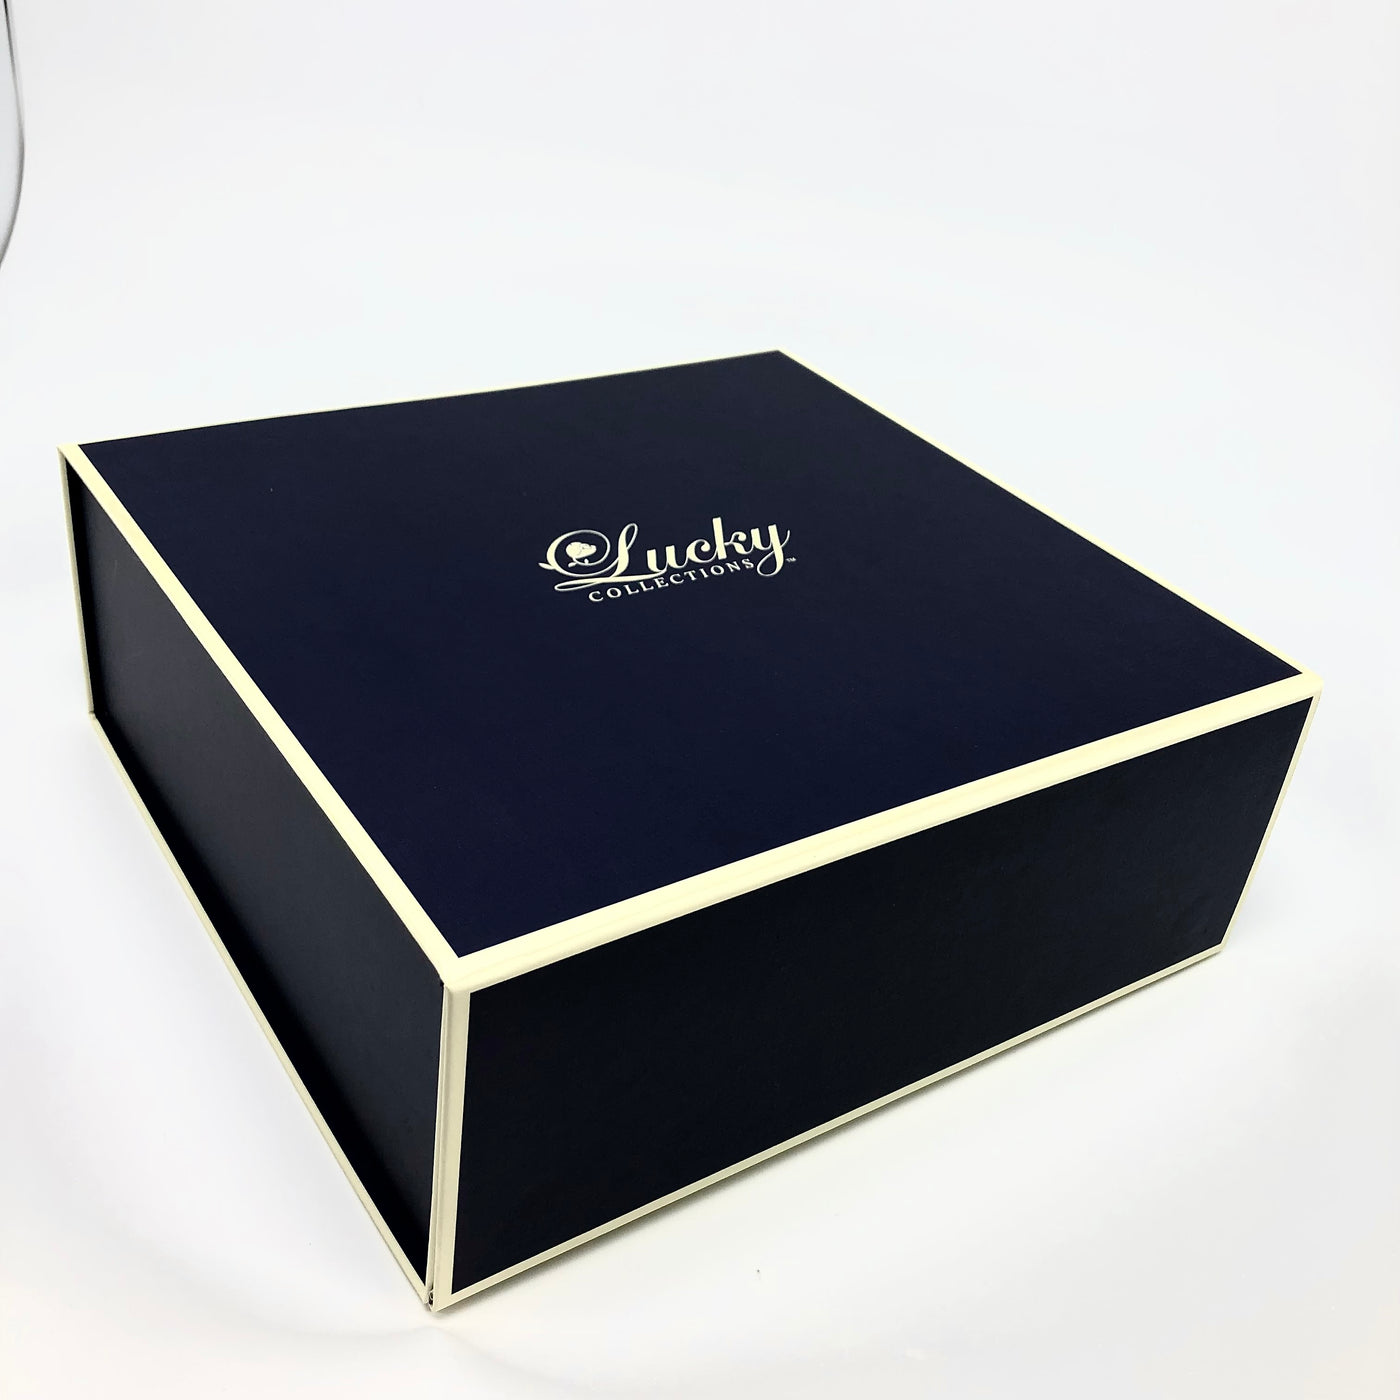 The Tiara comes in Lucky Collections ™ Custom Box for Keepsake and presentation. Lucky Collections ™